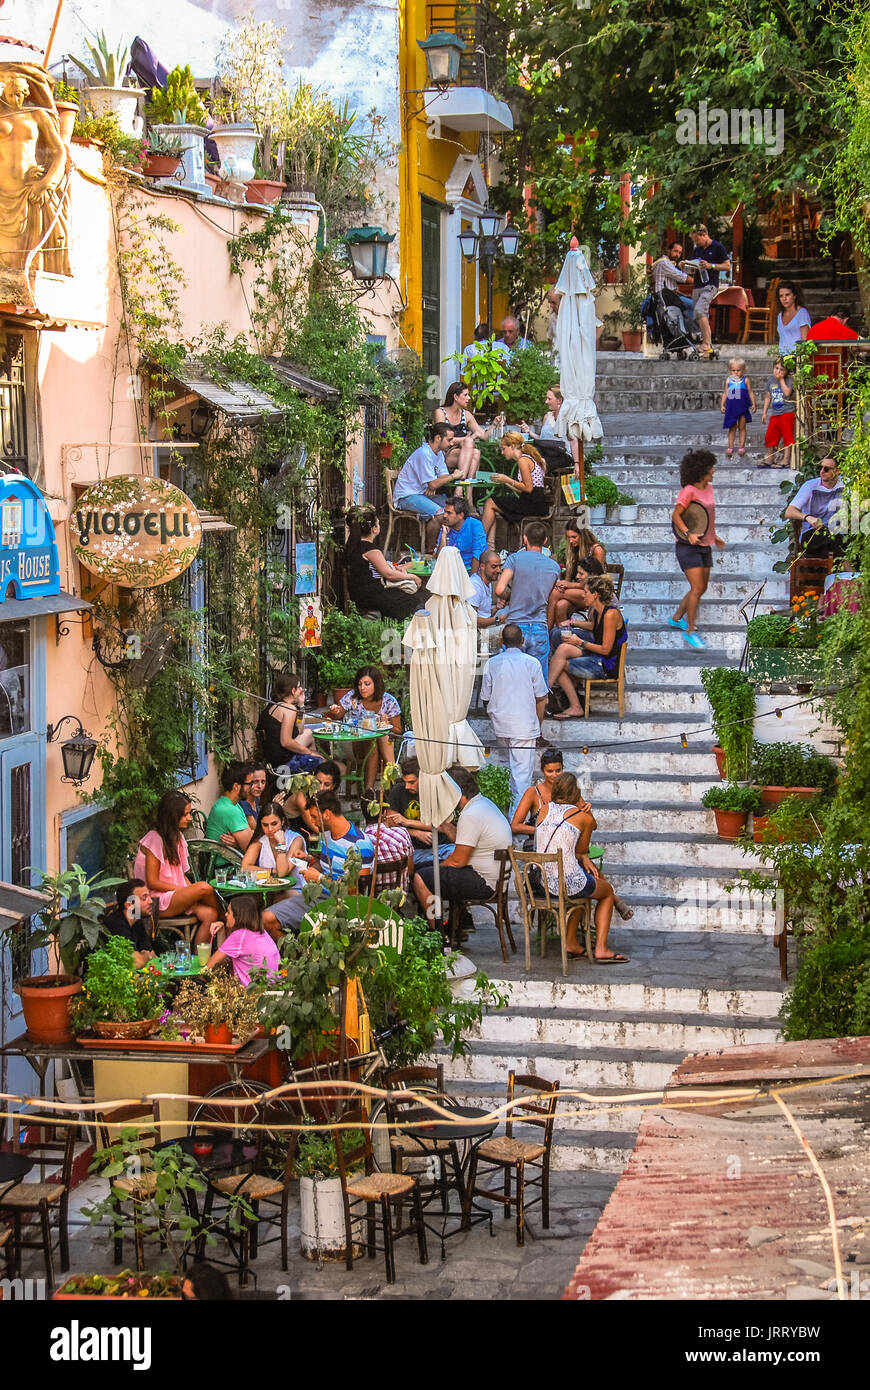 Athens, Greece - August 2, 2012: People dining outside on the stairs in the Plaka district of Athens. Stock Photo